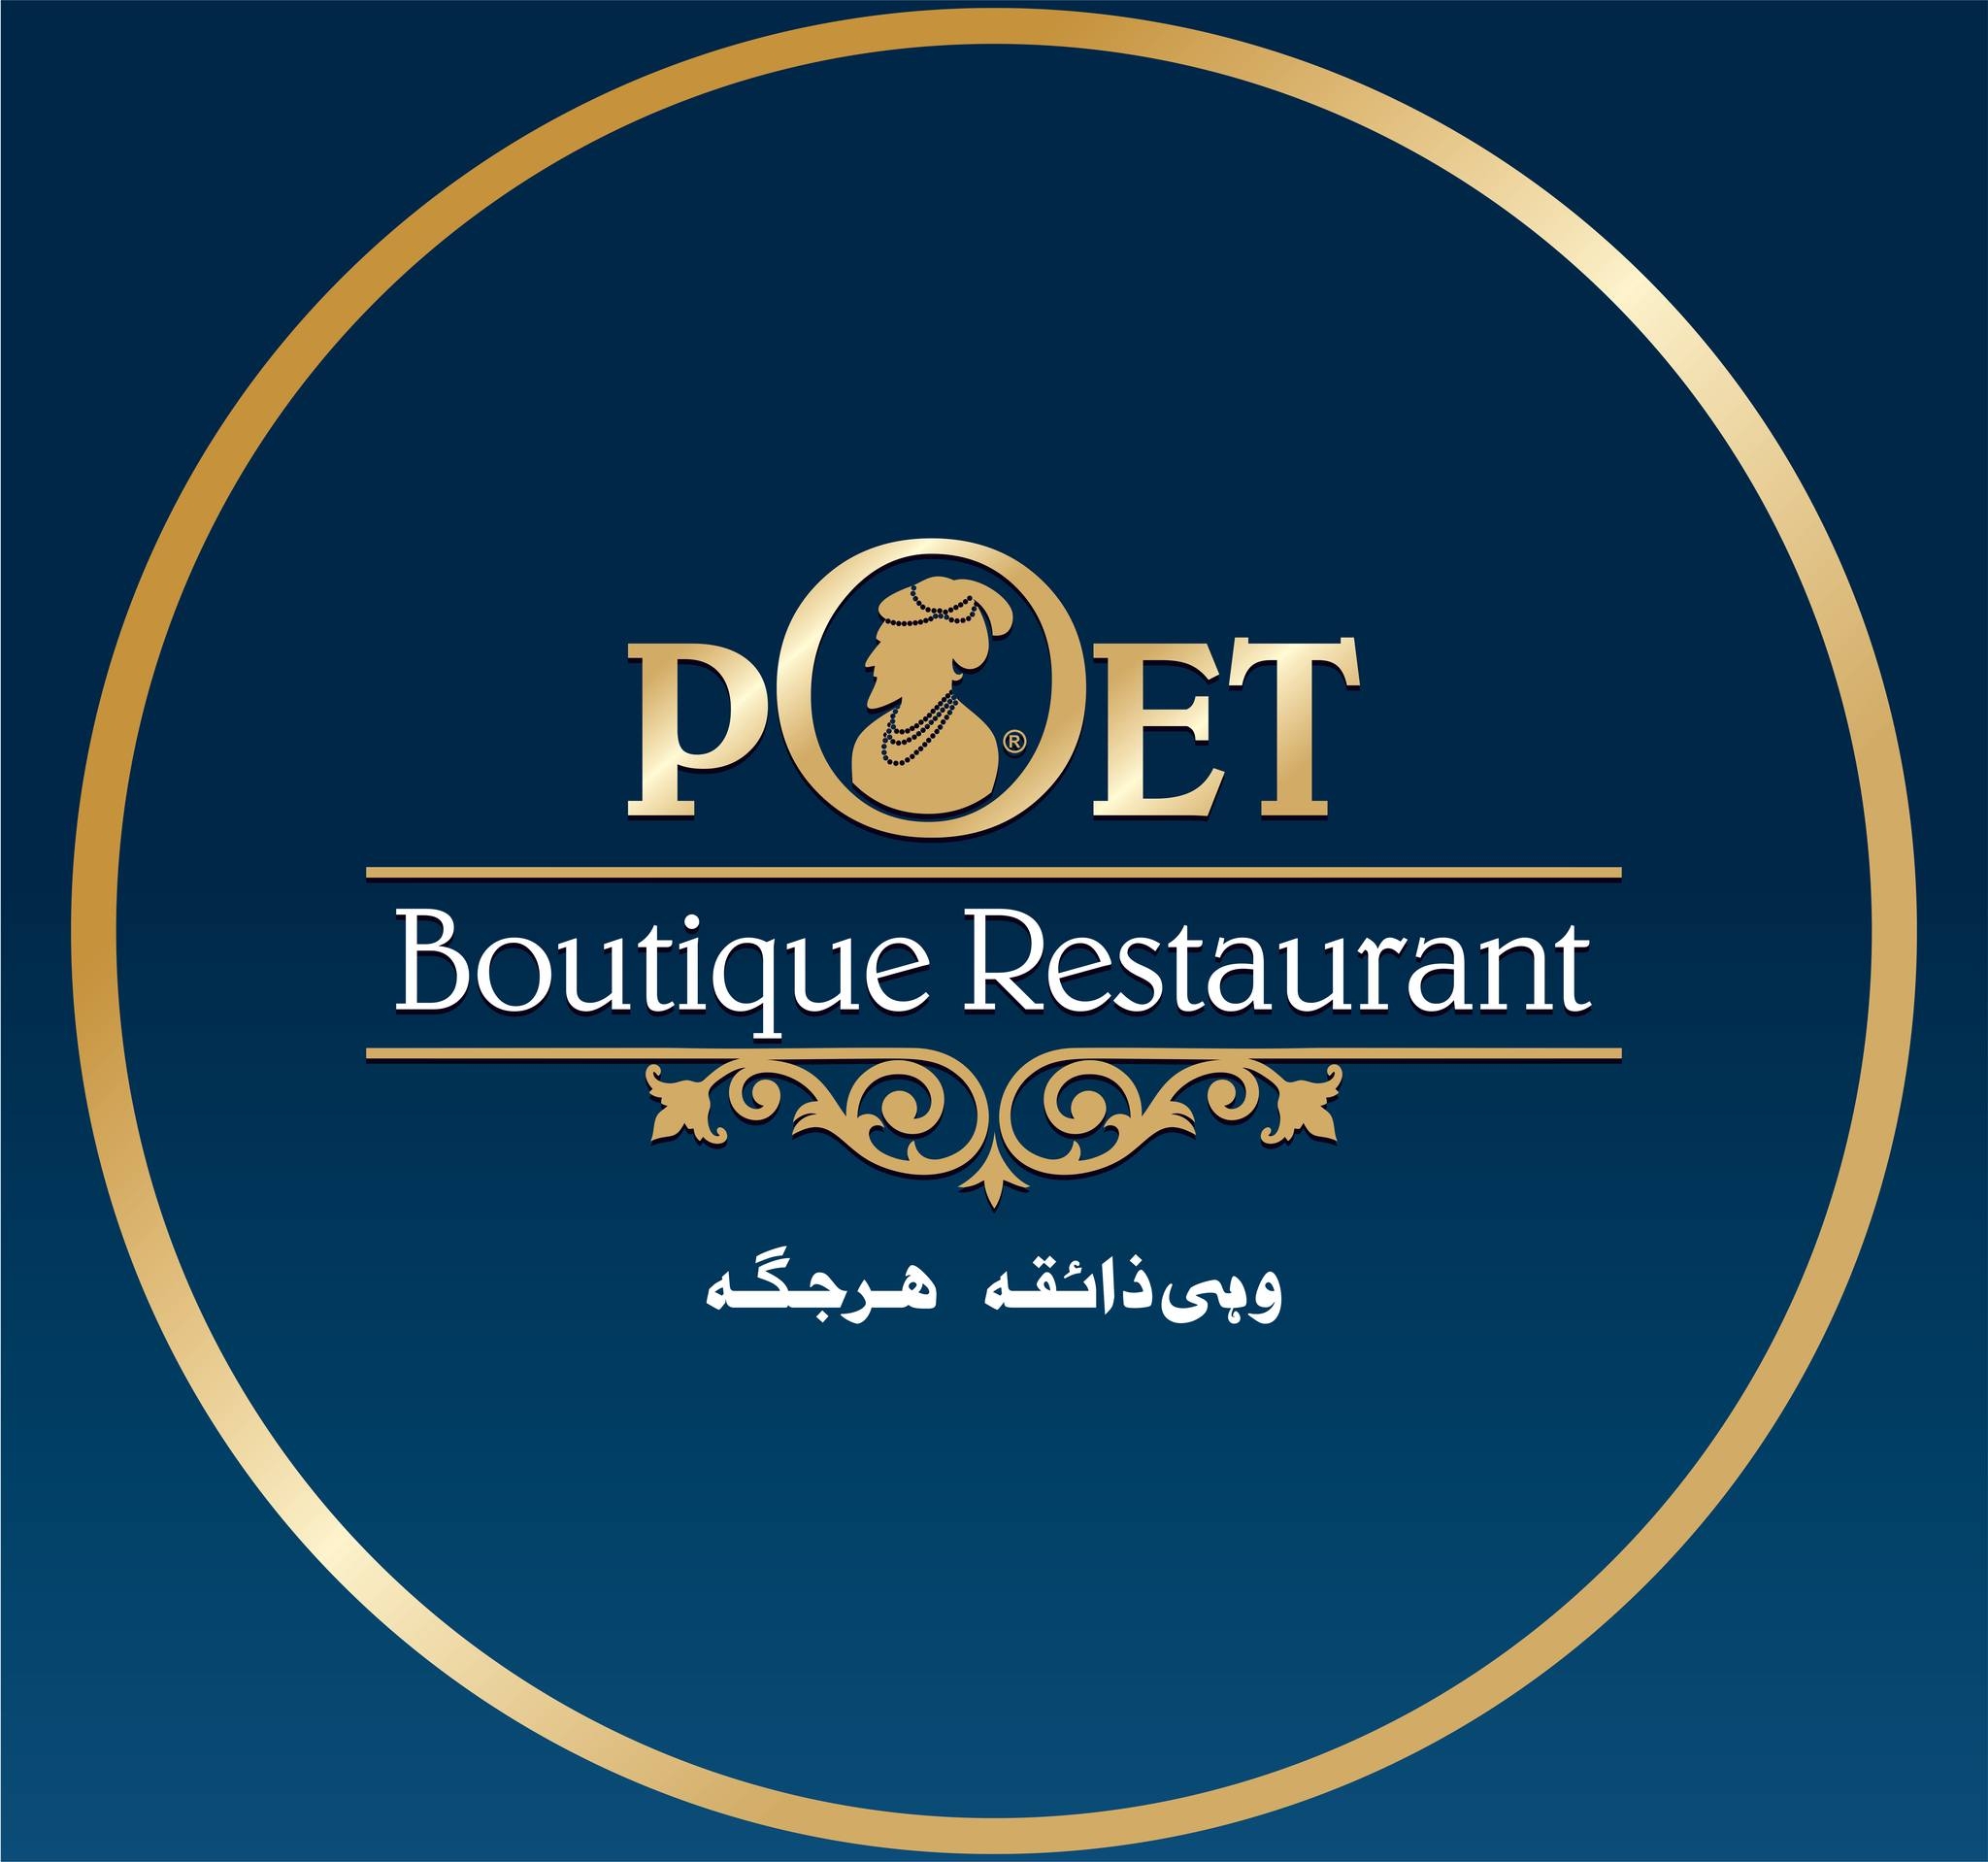 Poet Restaurant Lake City,Lahore, Punjab, Pakistan,Services,Free Classifieds,Post Free Ads,77traders.com